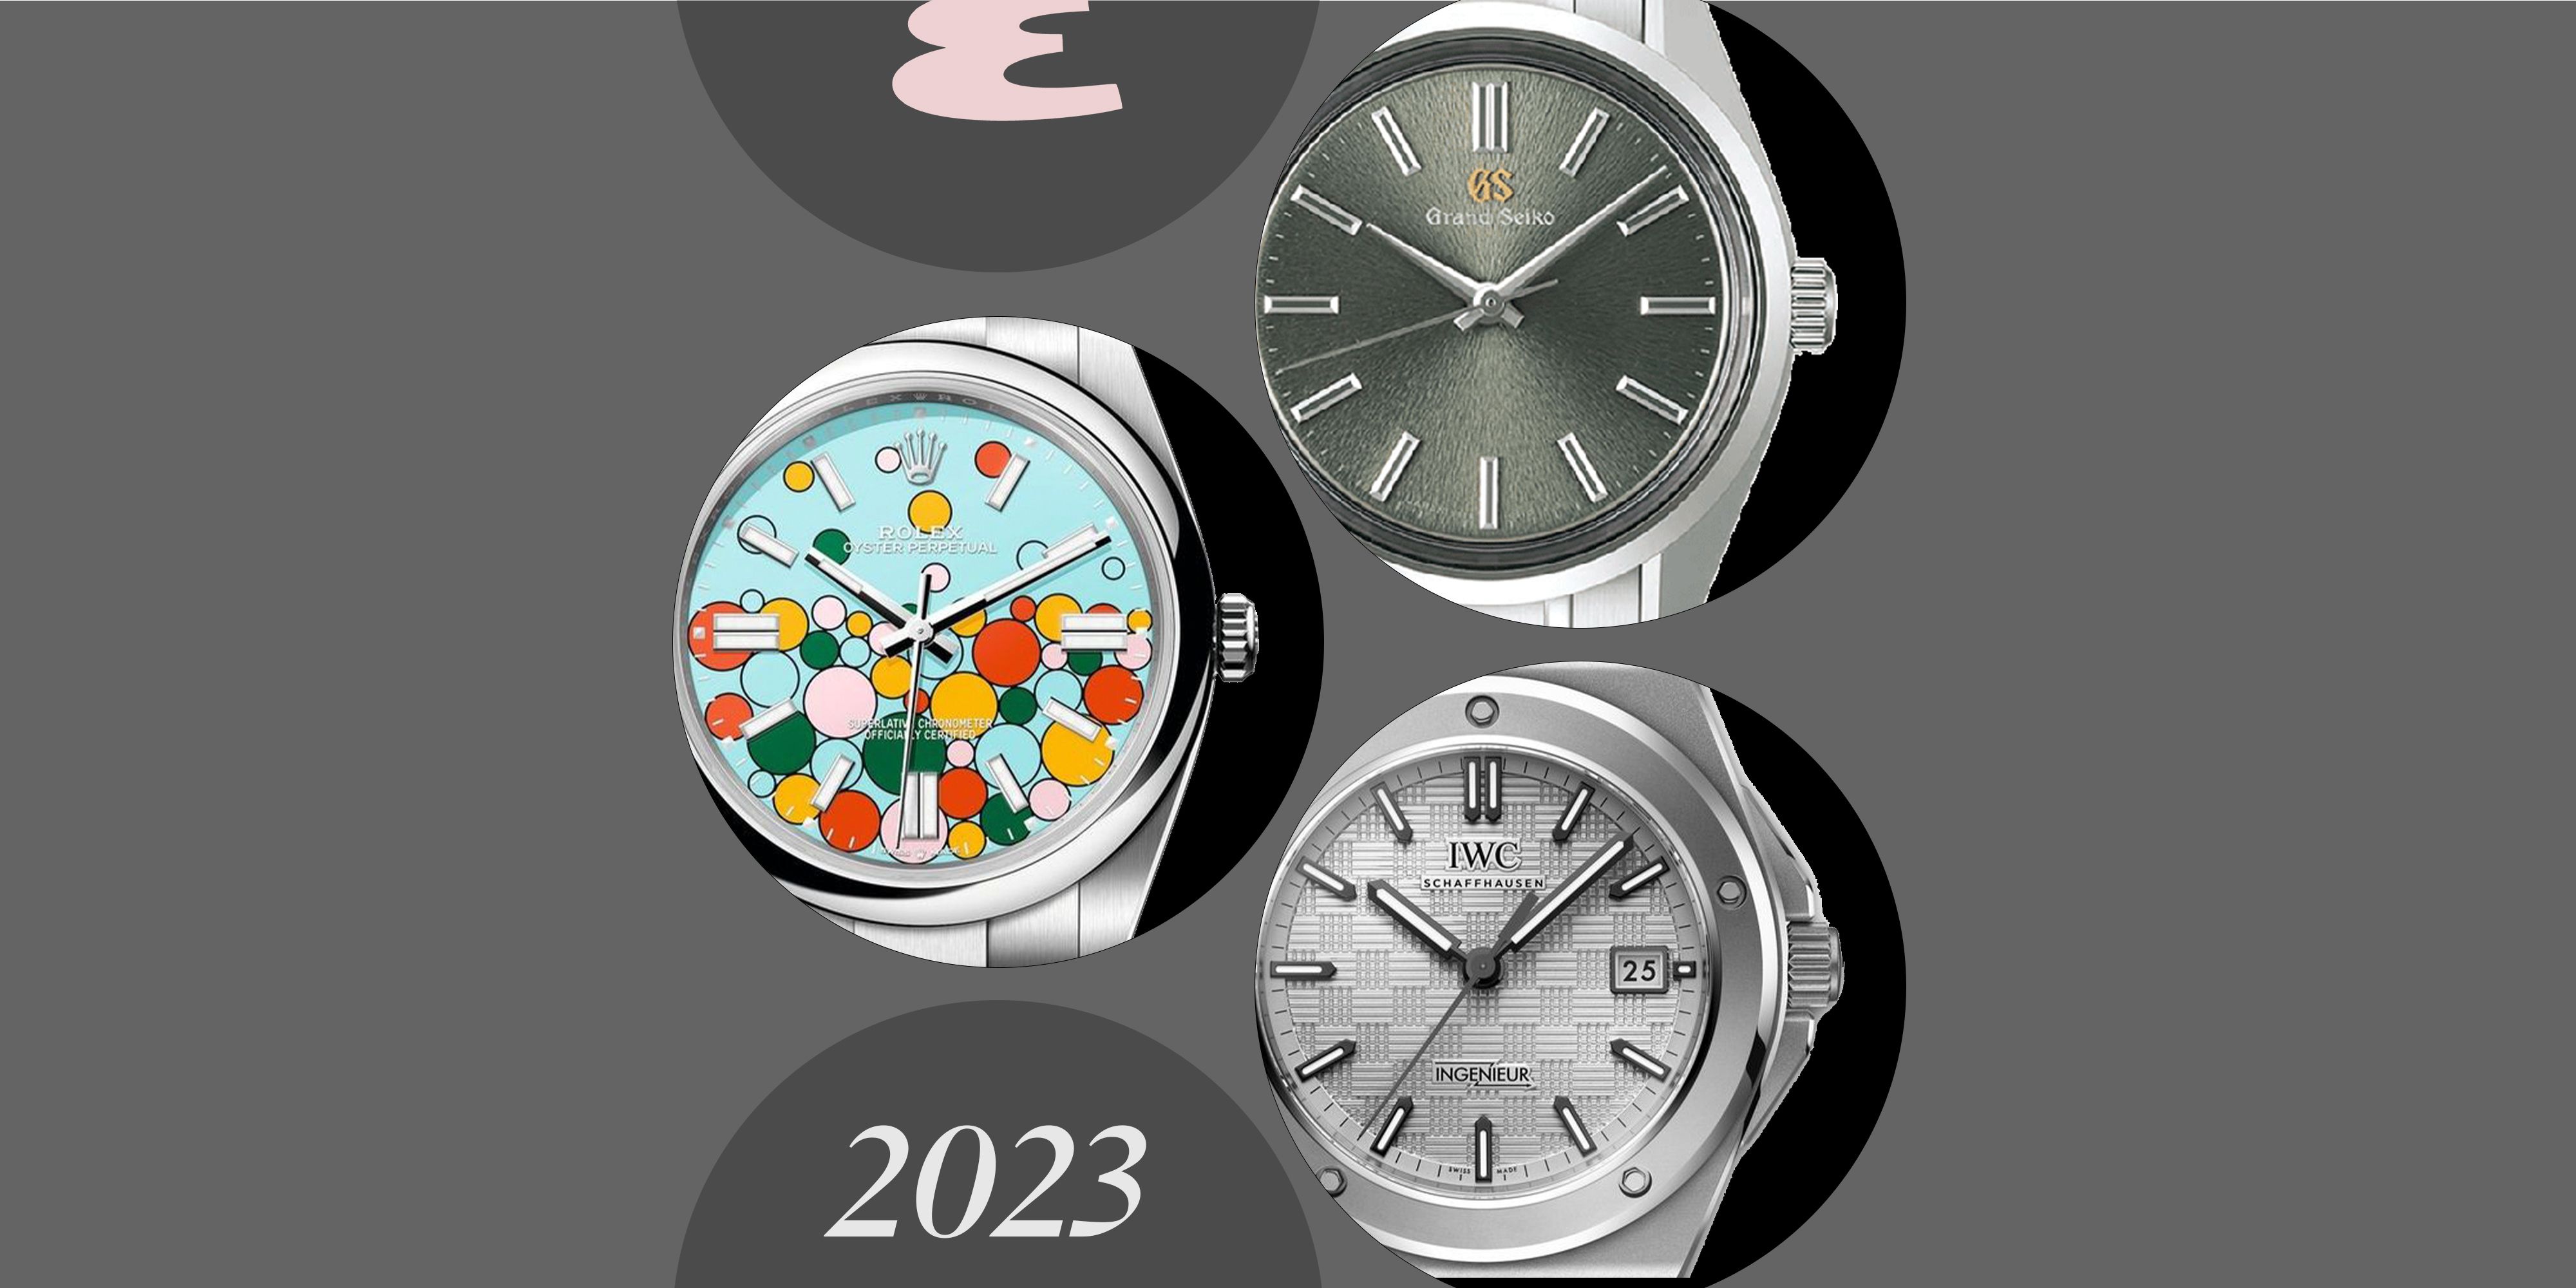 It looks like the Citizen Tsuyosa is the best automatic watch under 300$ in  2023 